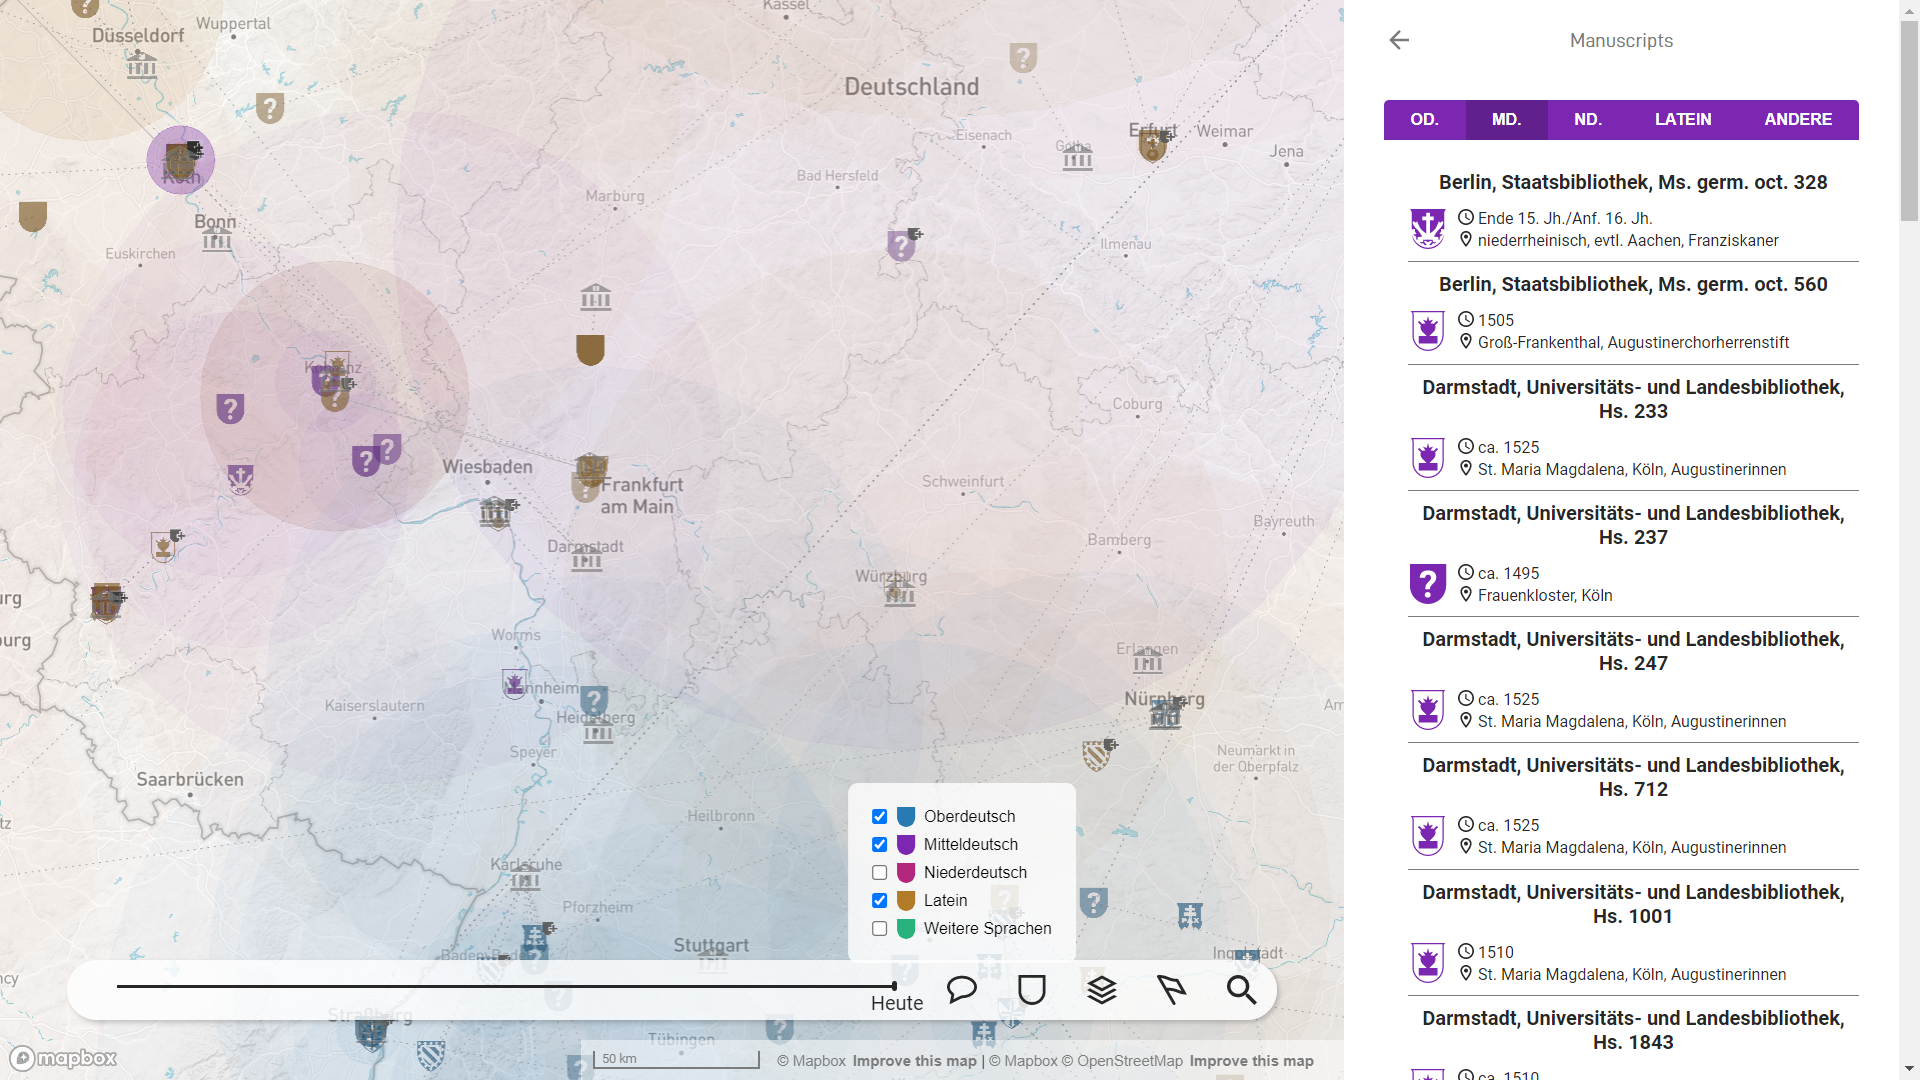 Screenshot of MMMMO. The map section shows central Europe, overlayed with numerous map features. Crests of monastic orders are displayed as icons to show the location and the belonging of each manuscript. The icons are of different colors, some have half-transparent circles around them and some are connected by solid, dashed or dotted lines. At the bottom of the screen is a taskbar with a timeline slider and several icons to filter the displayed features. At the right side of the screen is a sidebar that displays all manuscripts in Middle German language.